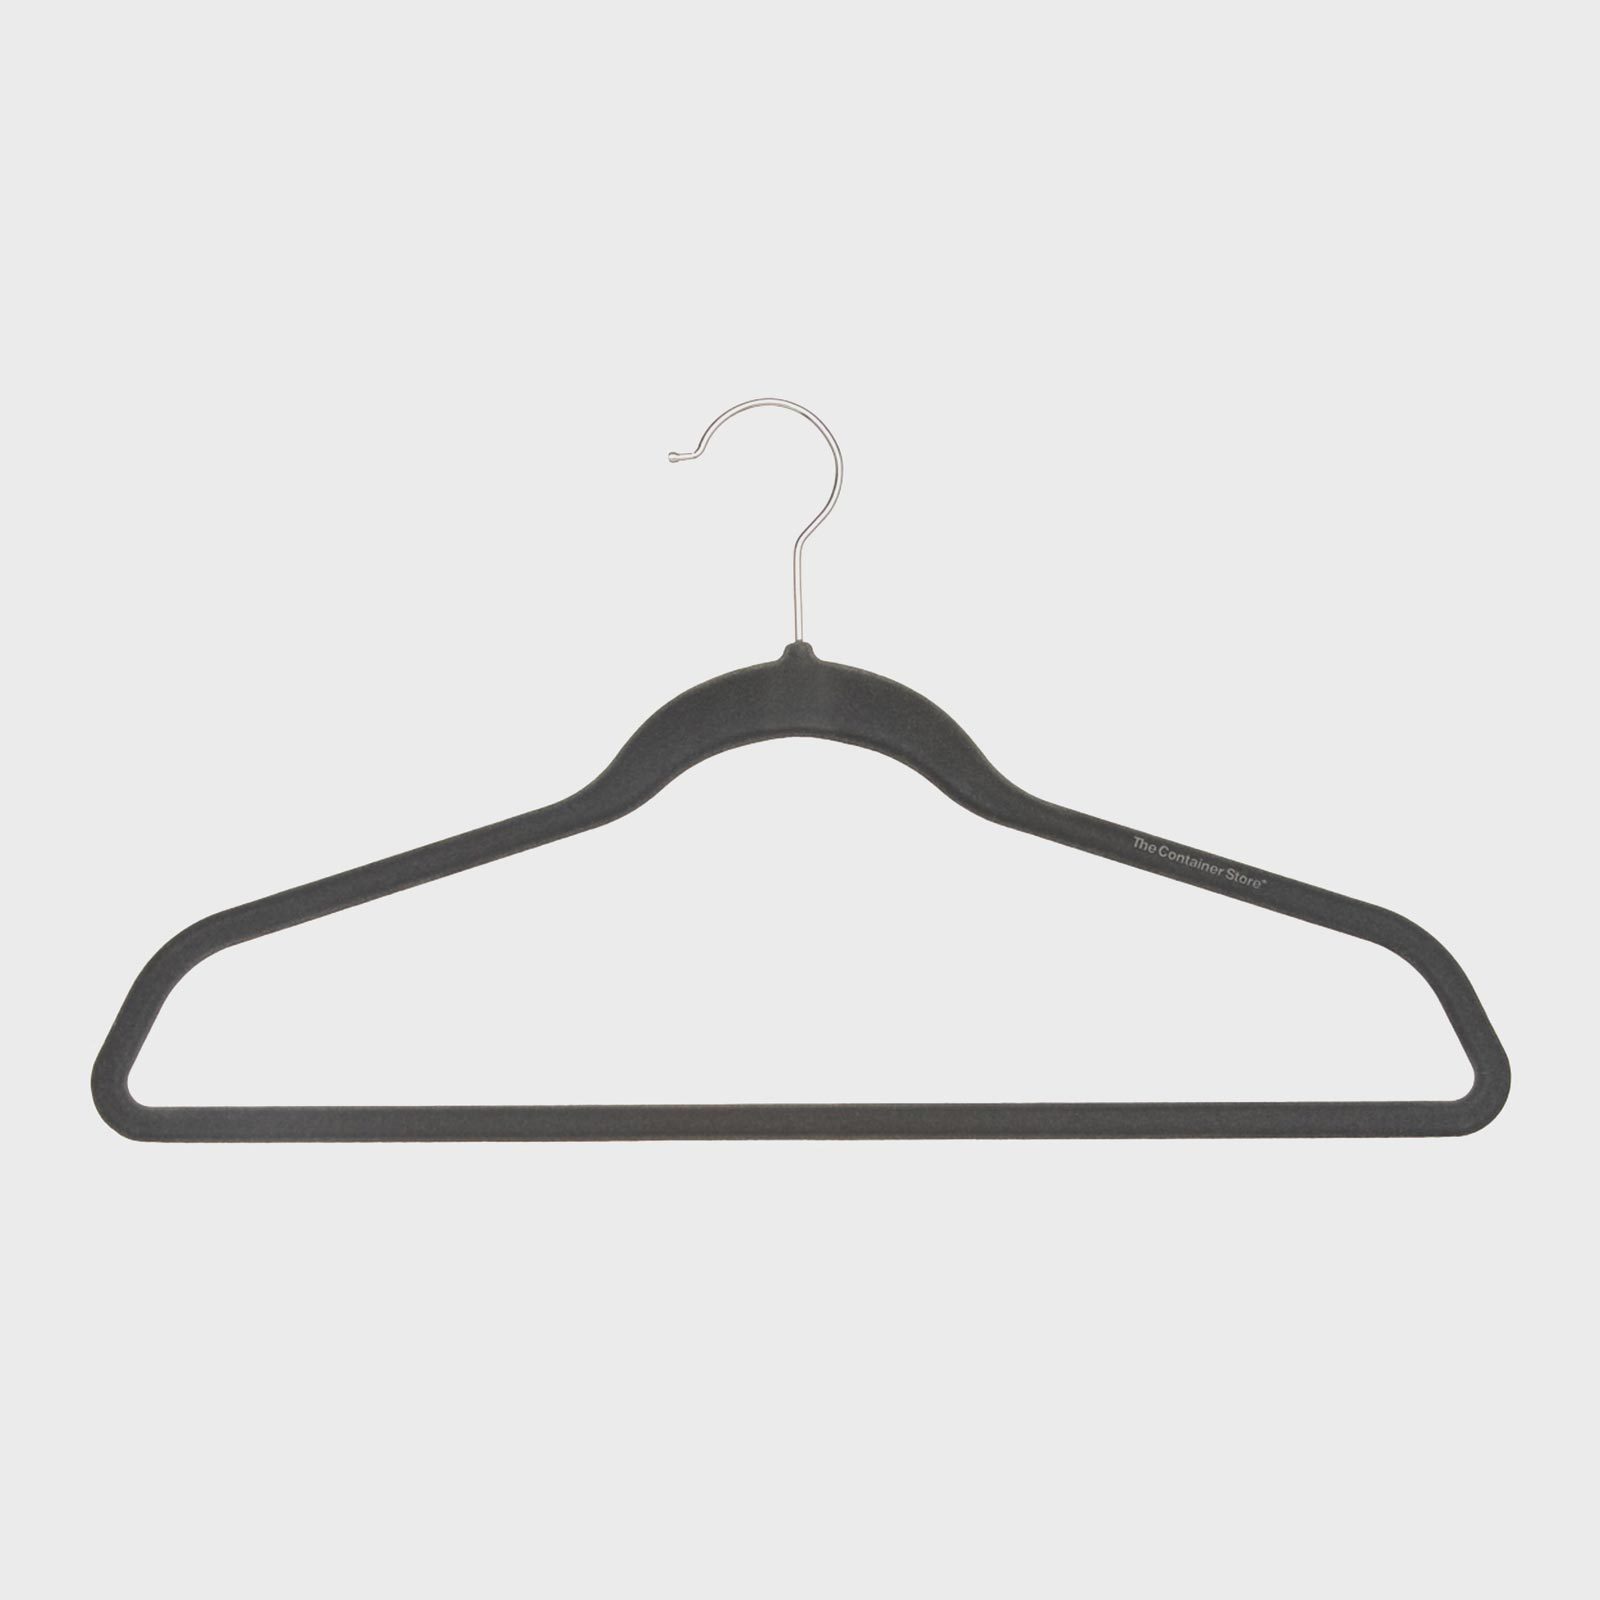 The Best Wooden Hangers for Your Closet – STORAGEWORKS